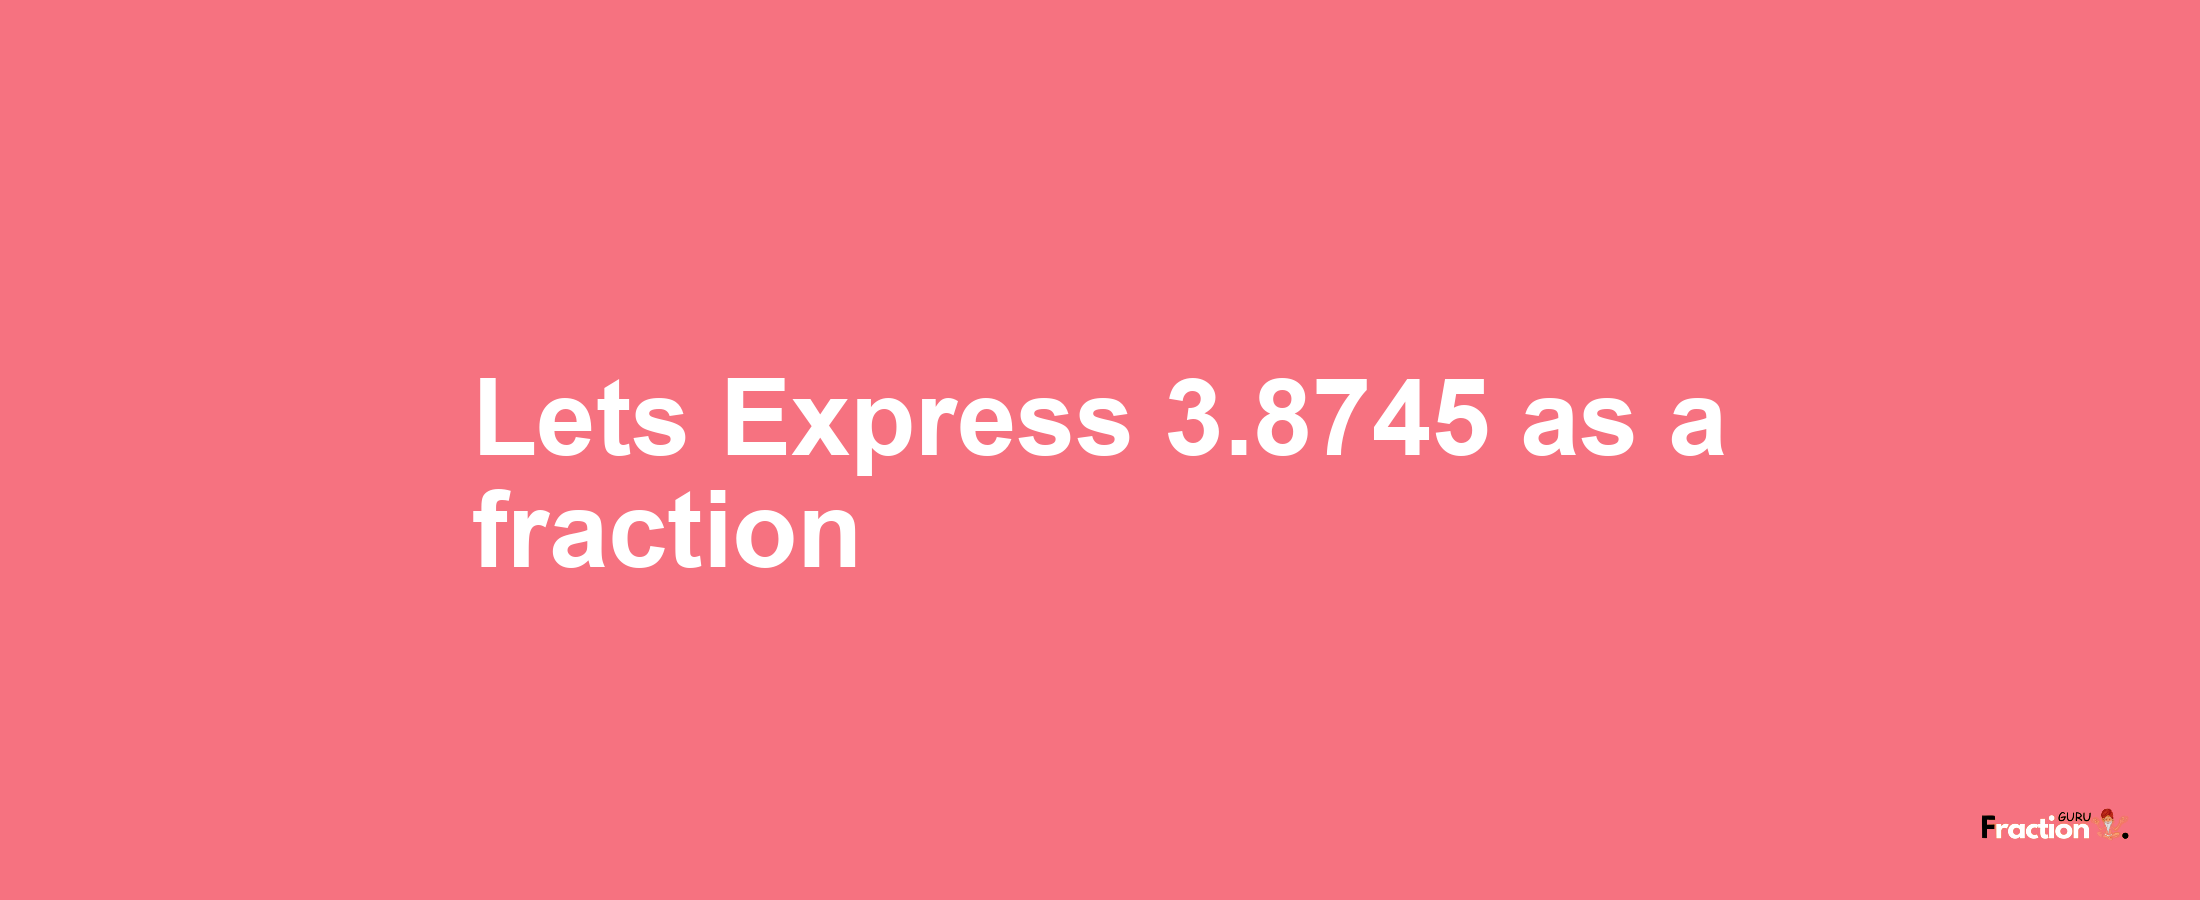 Lets Express 3.8745 as afraction